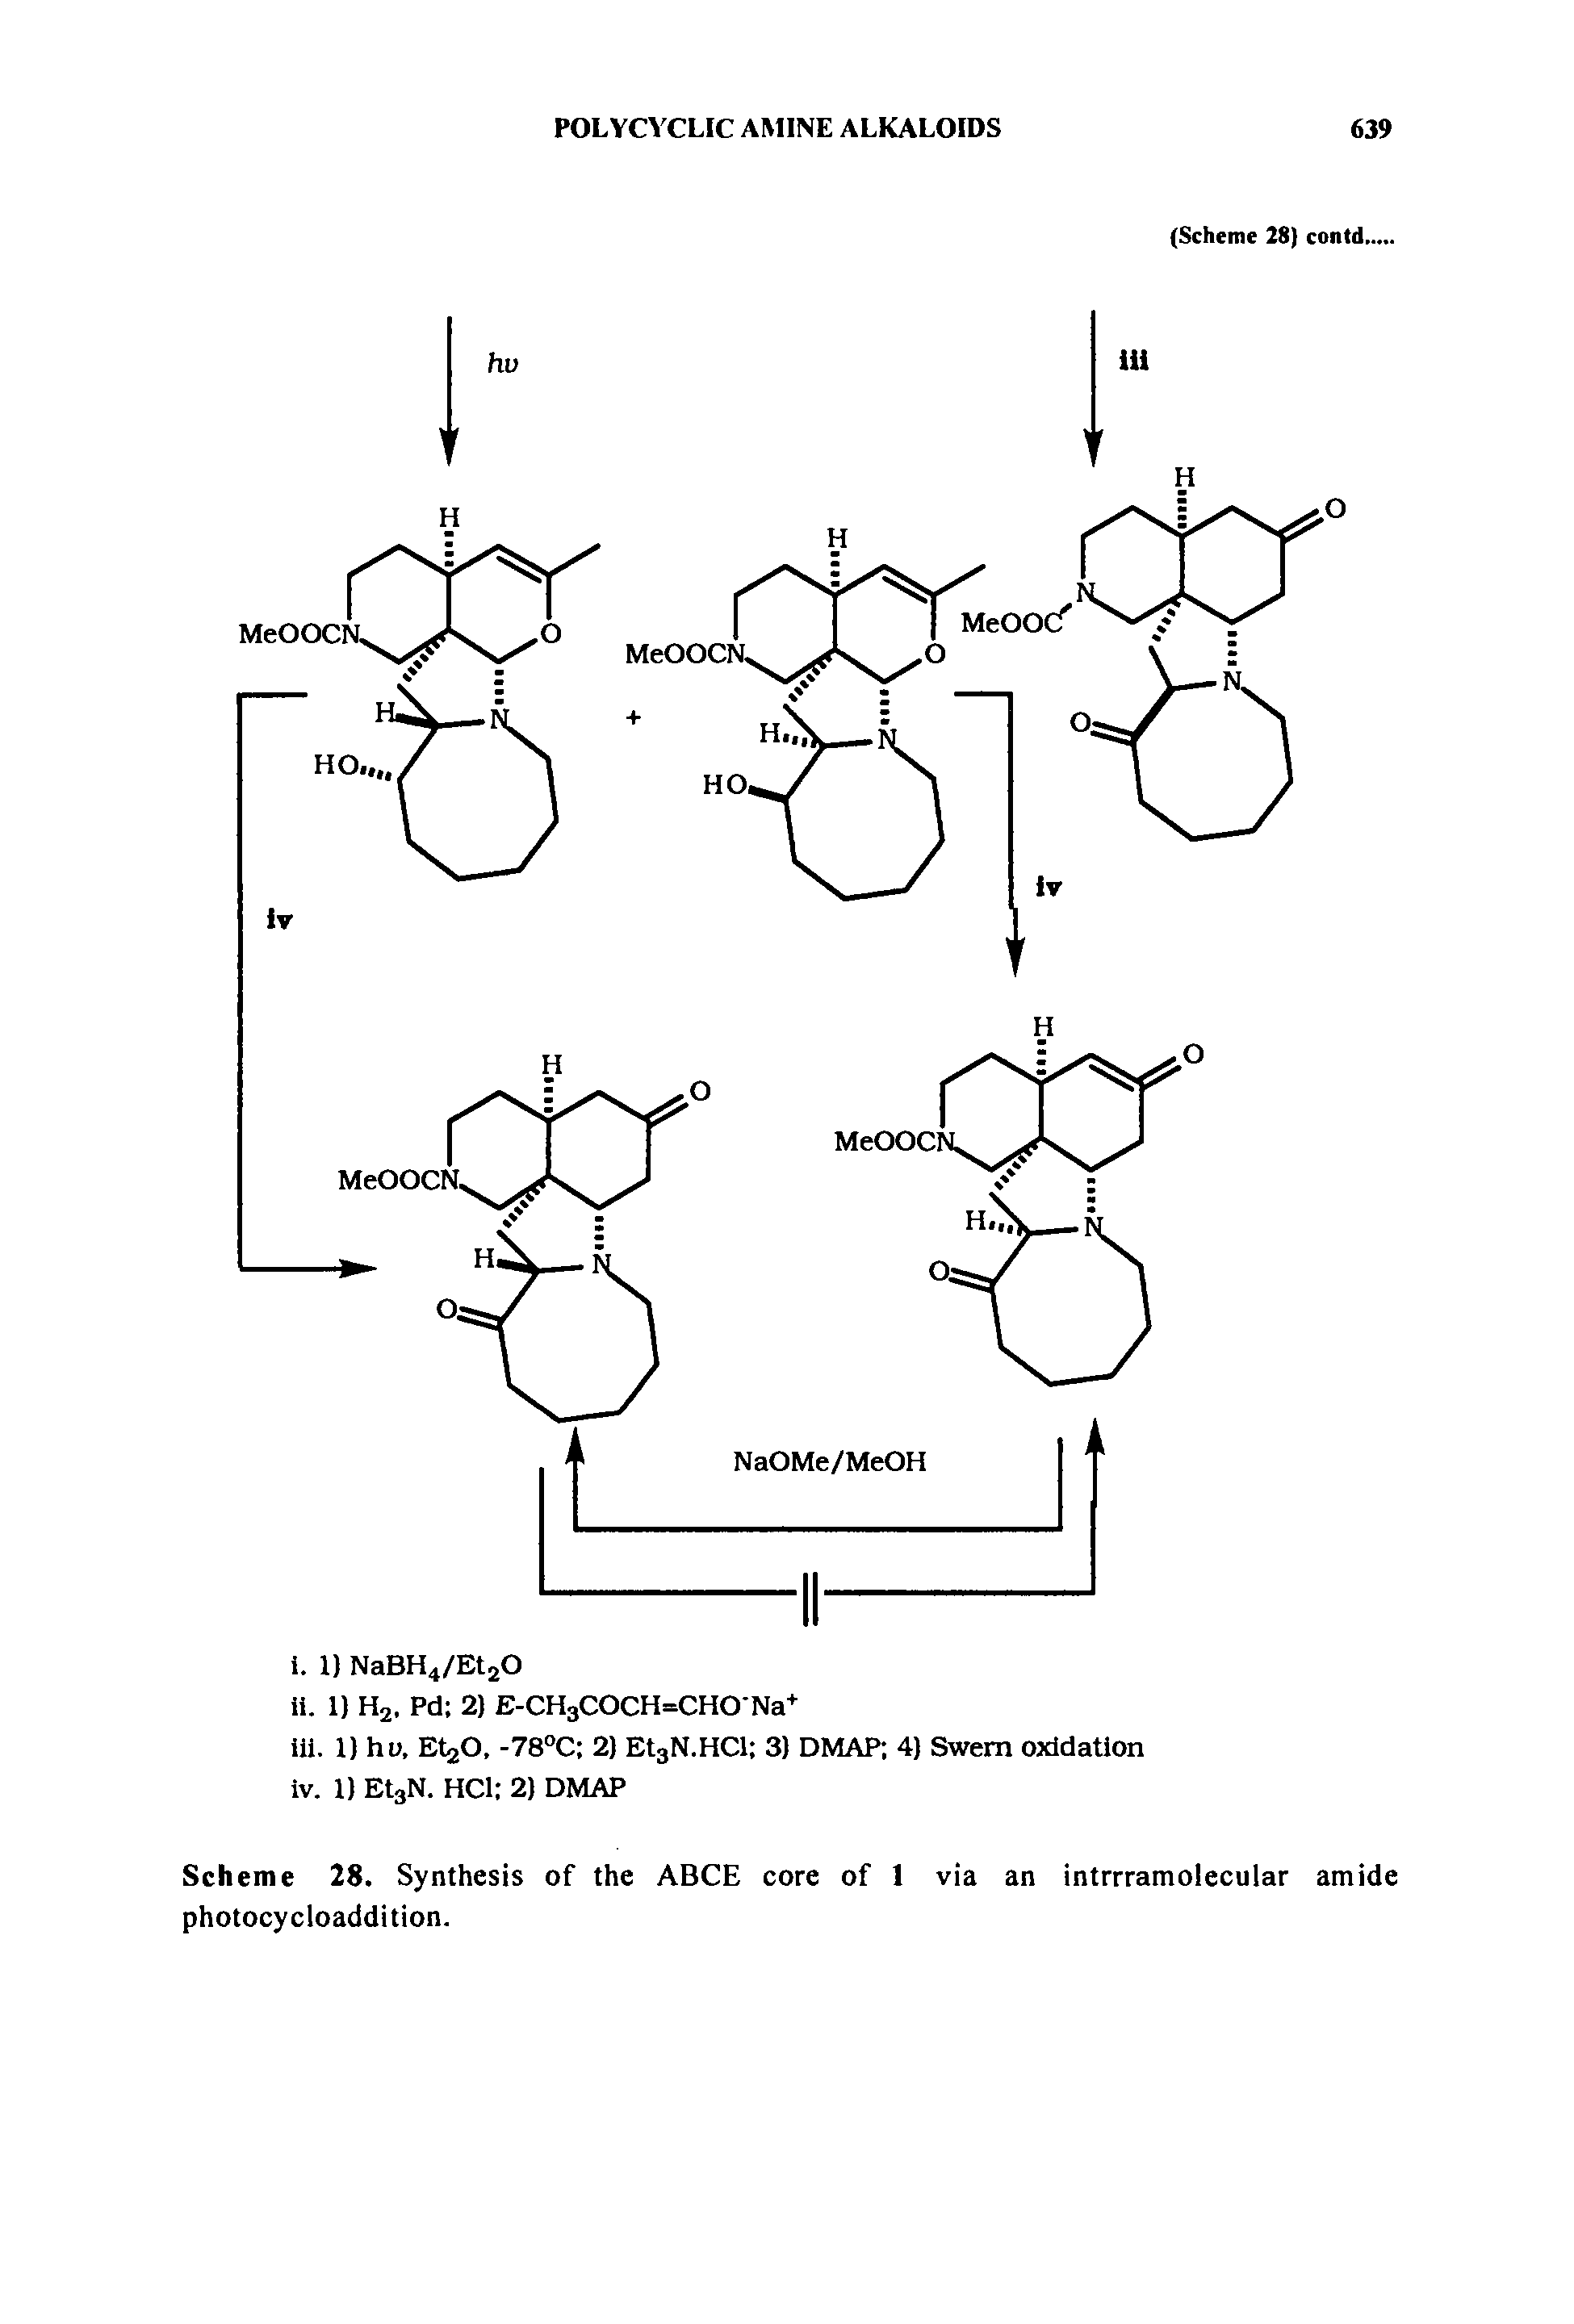 Scheme 28. Synthesis of the ABCE core of 1 via an intrrramolecular amide photocycloaddition.